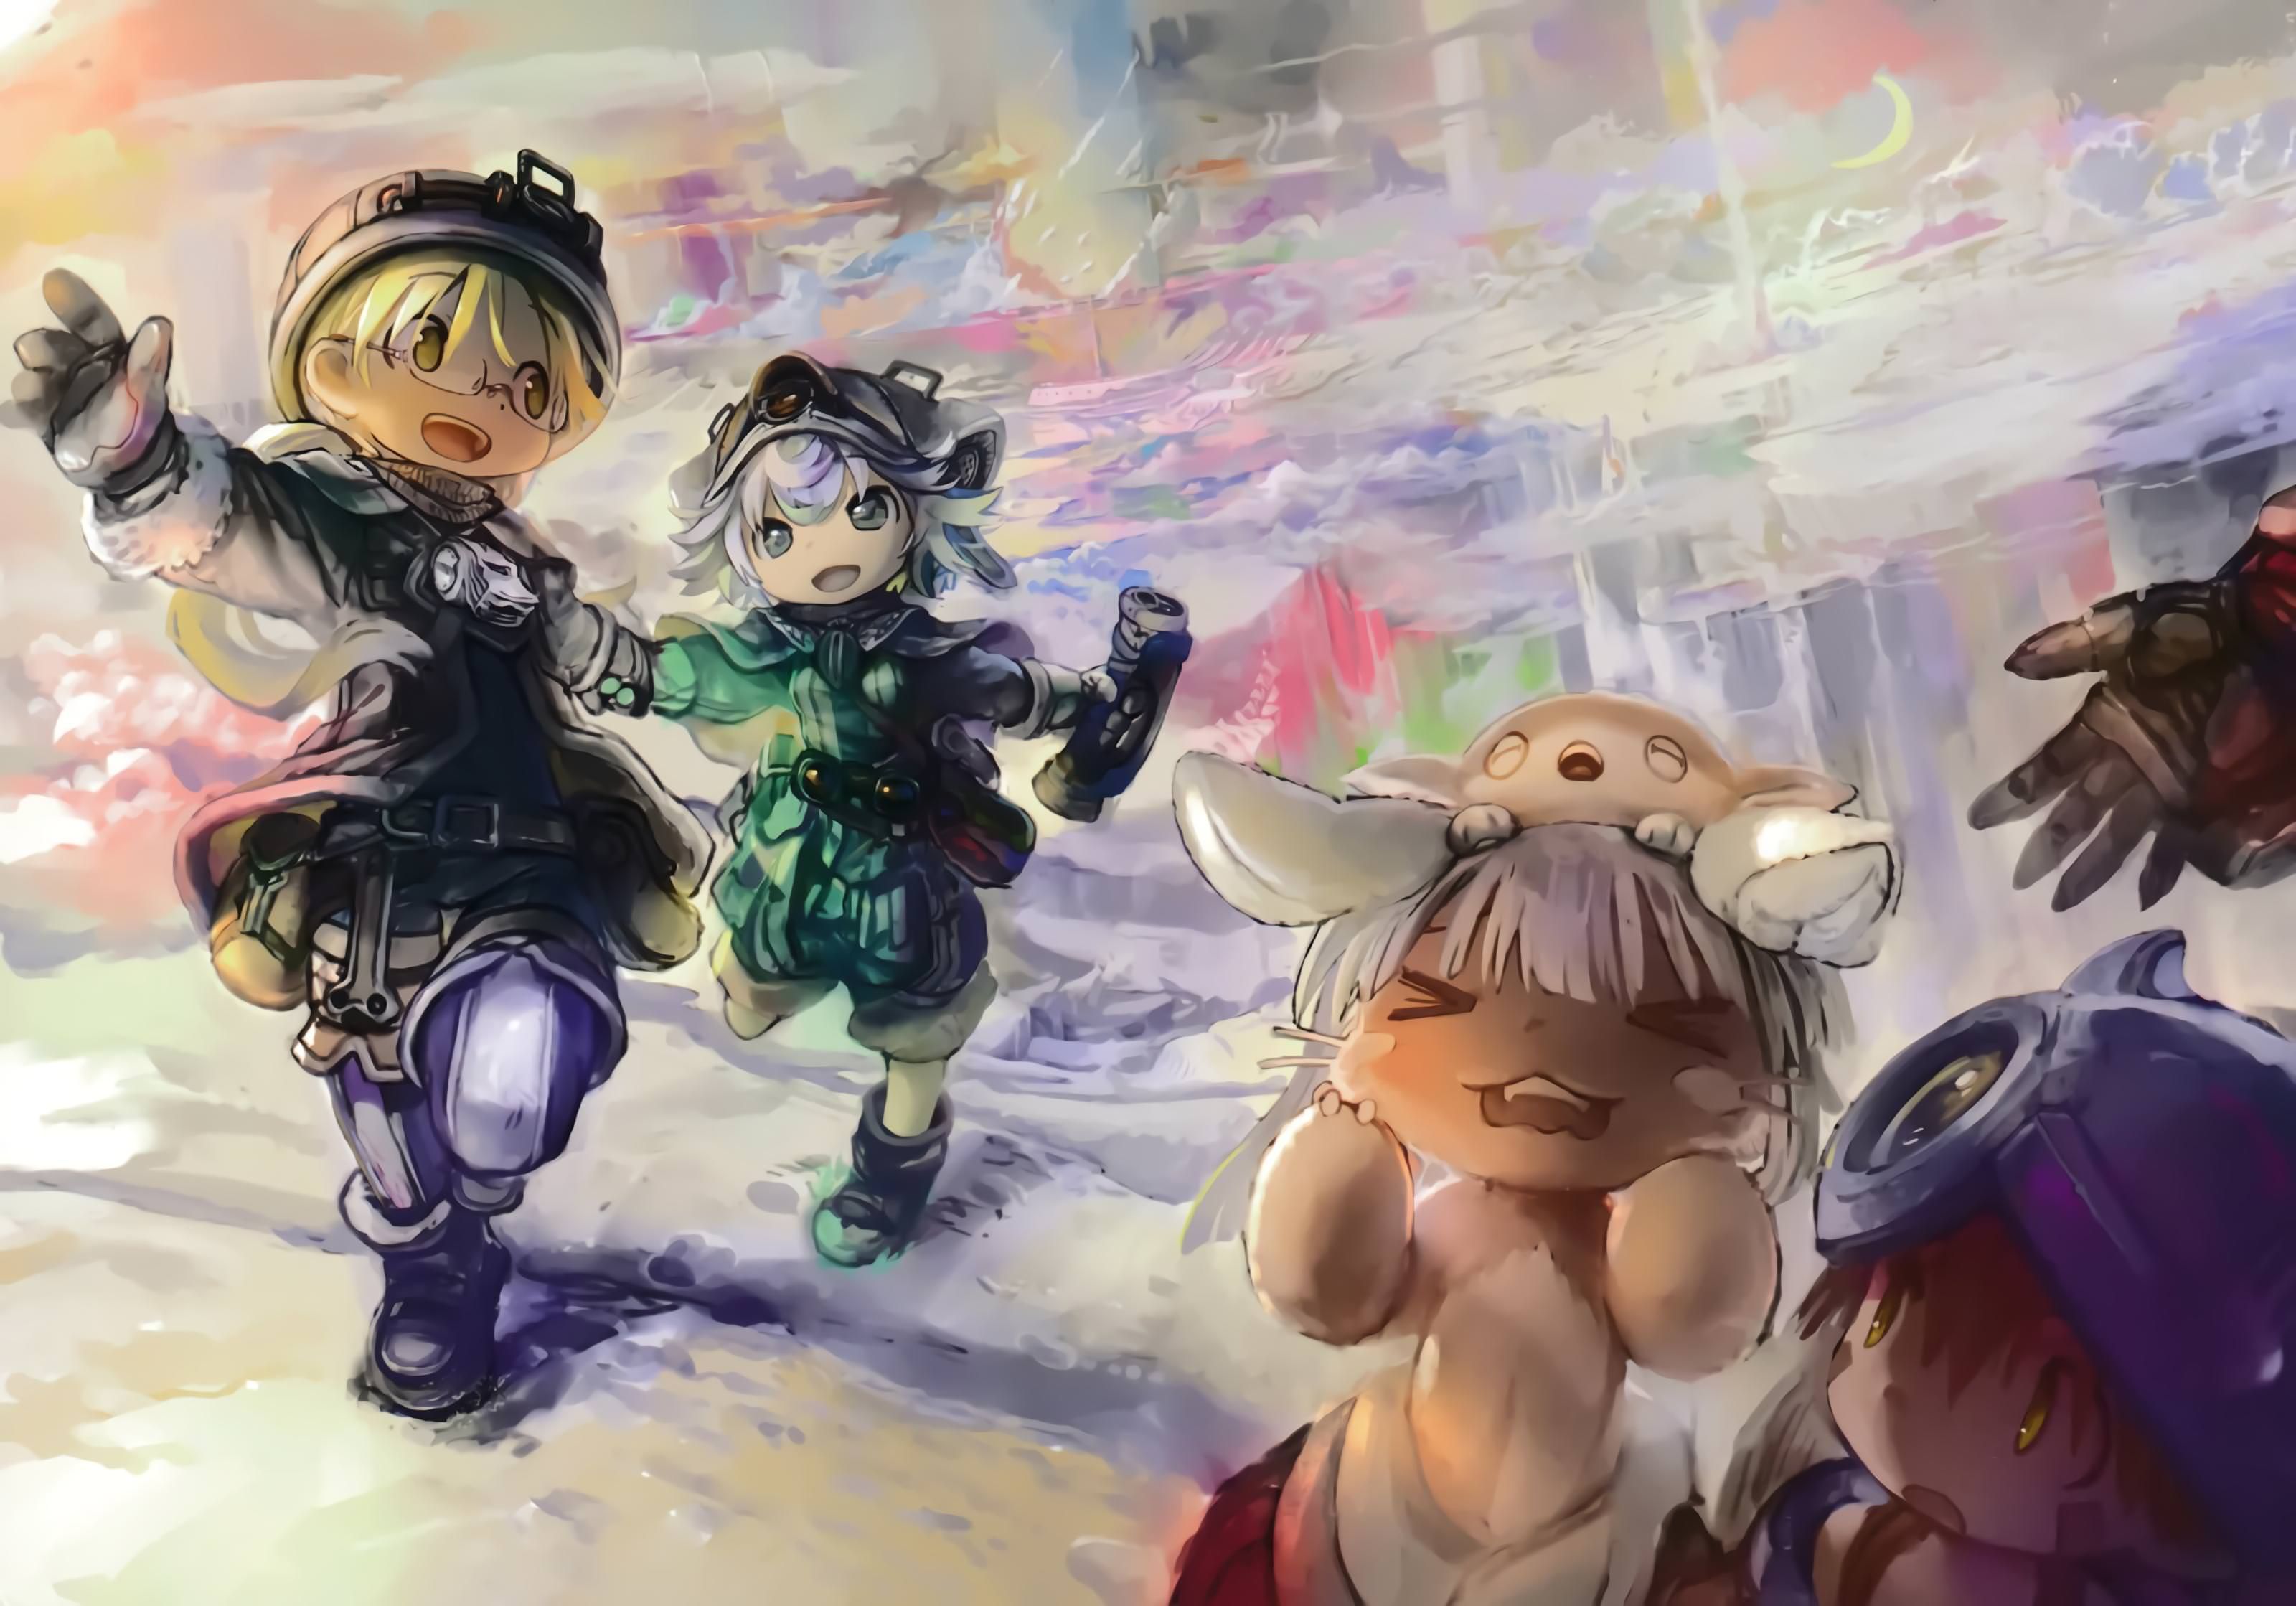 Made In Abyss Wallpaper Covers Volume 1. Anime, Kawaii Anime